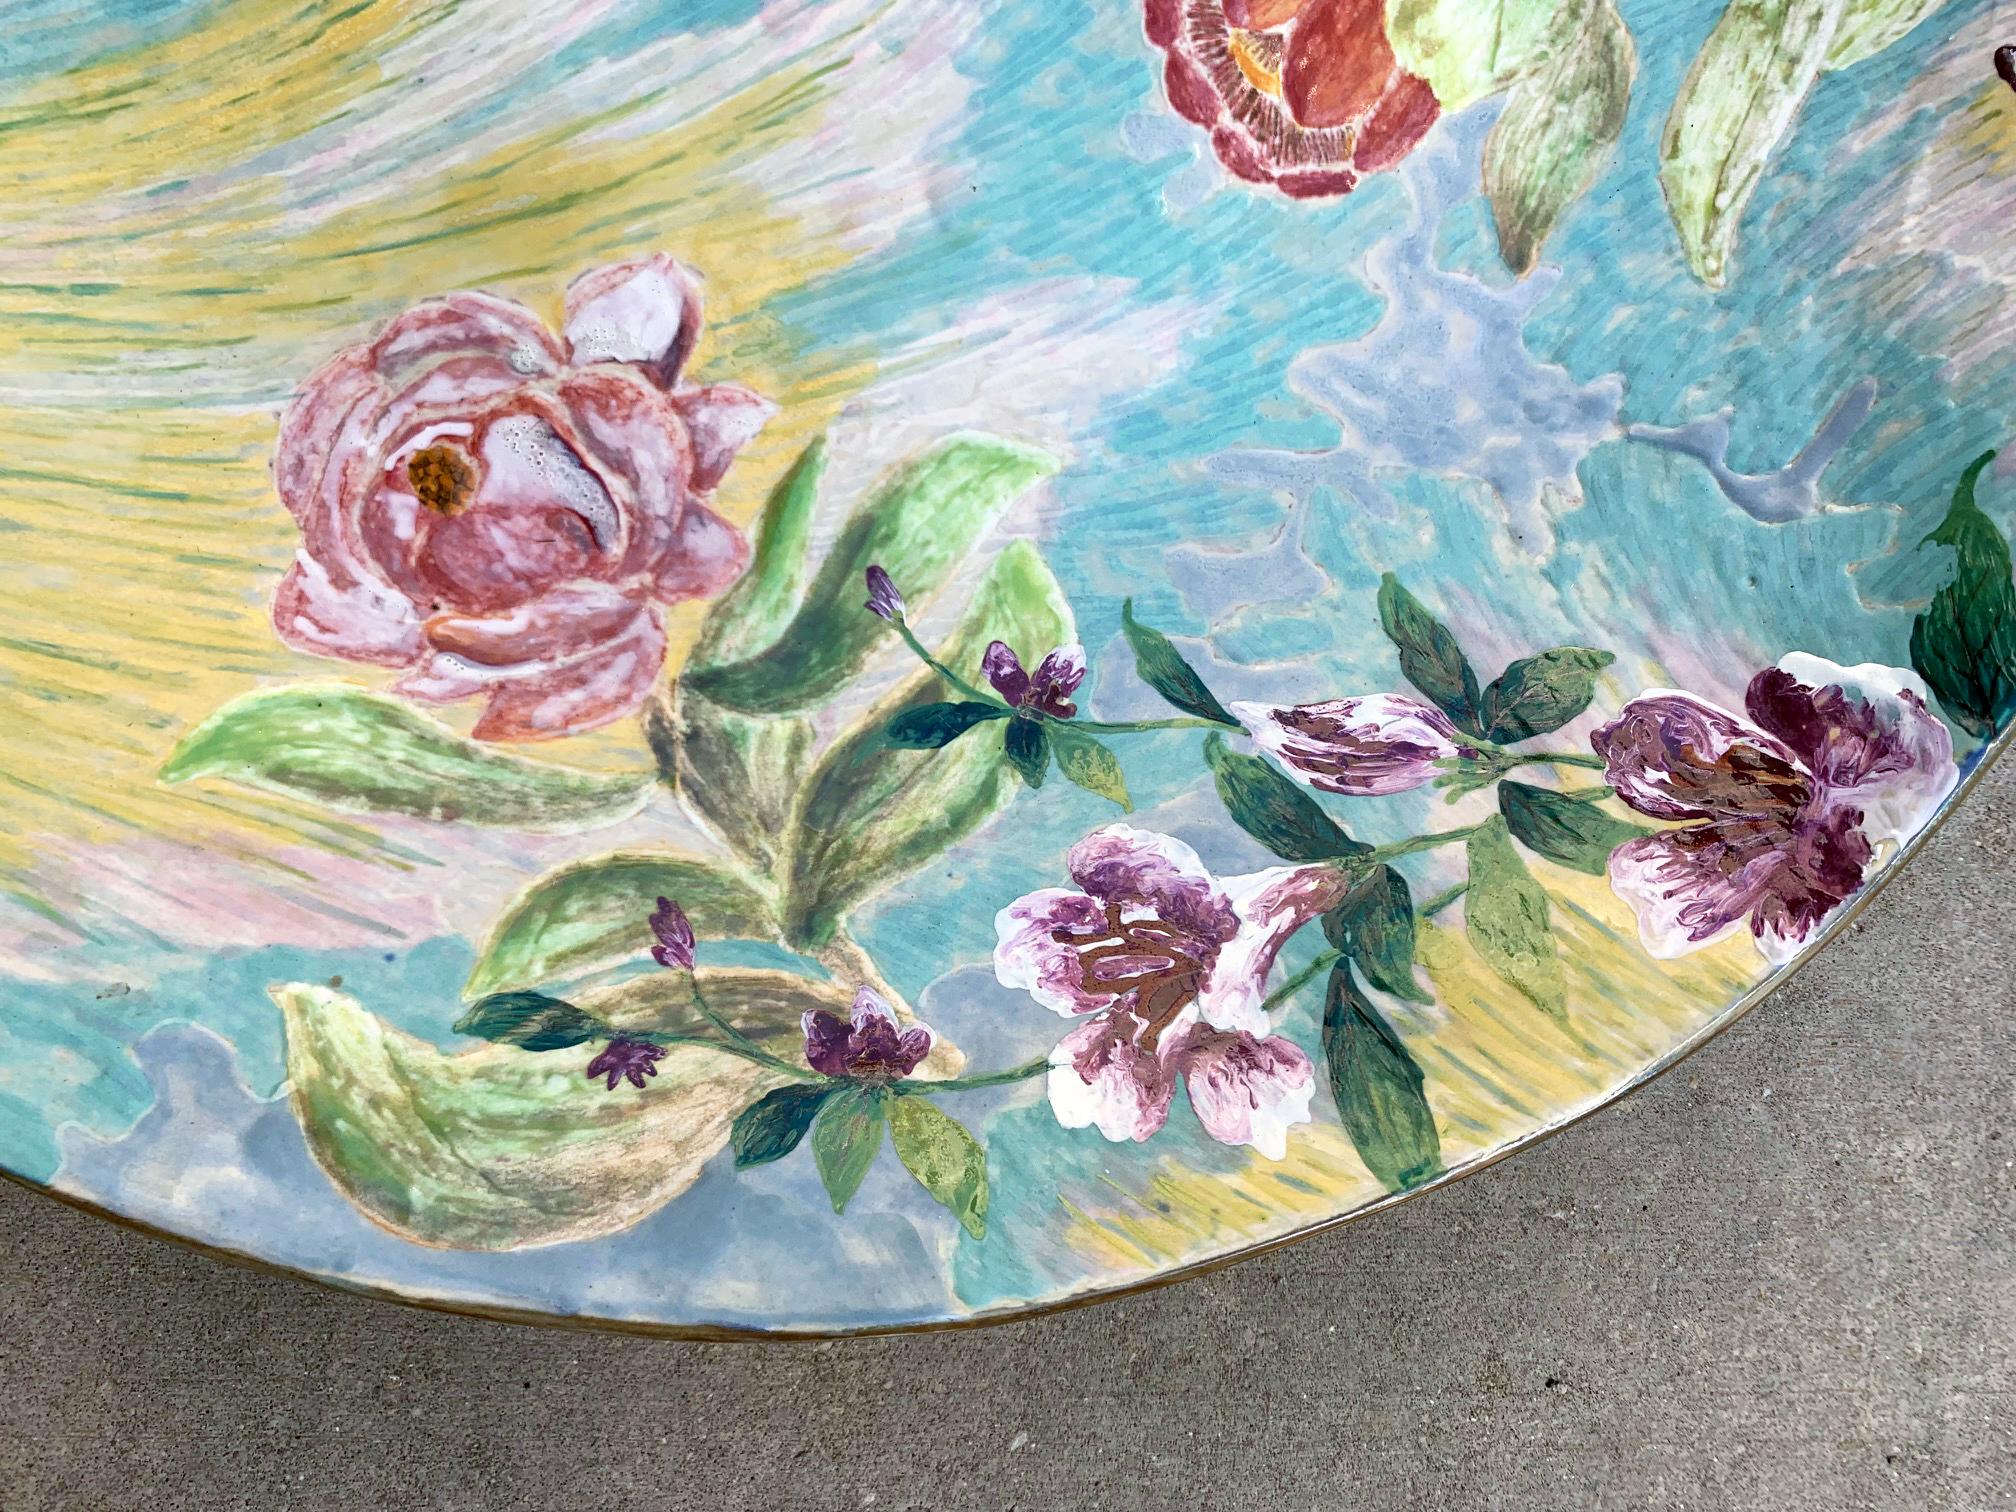 Thai Ceramic Plate with Hand Painted Floral Designs